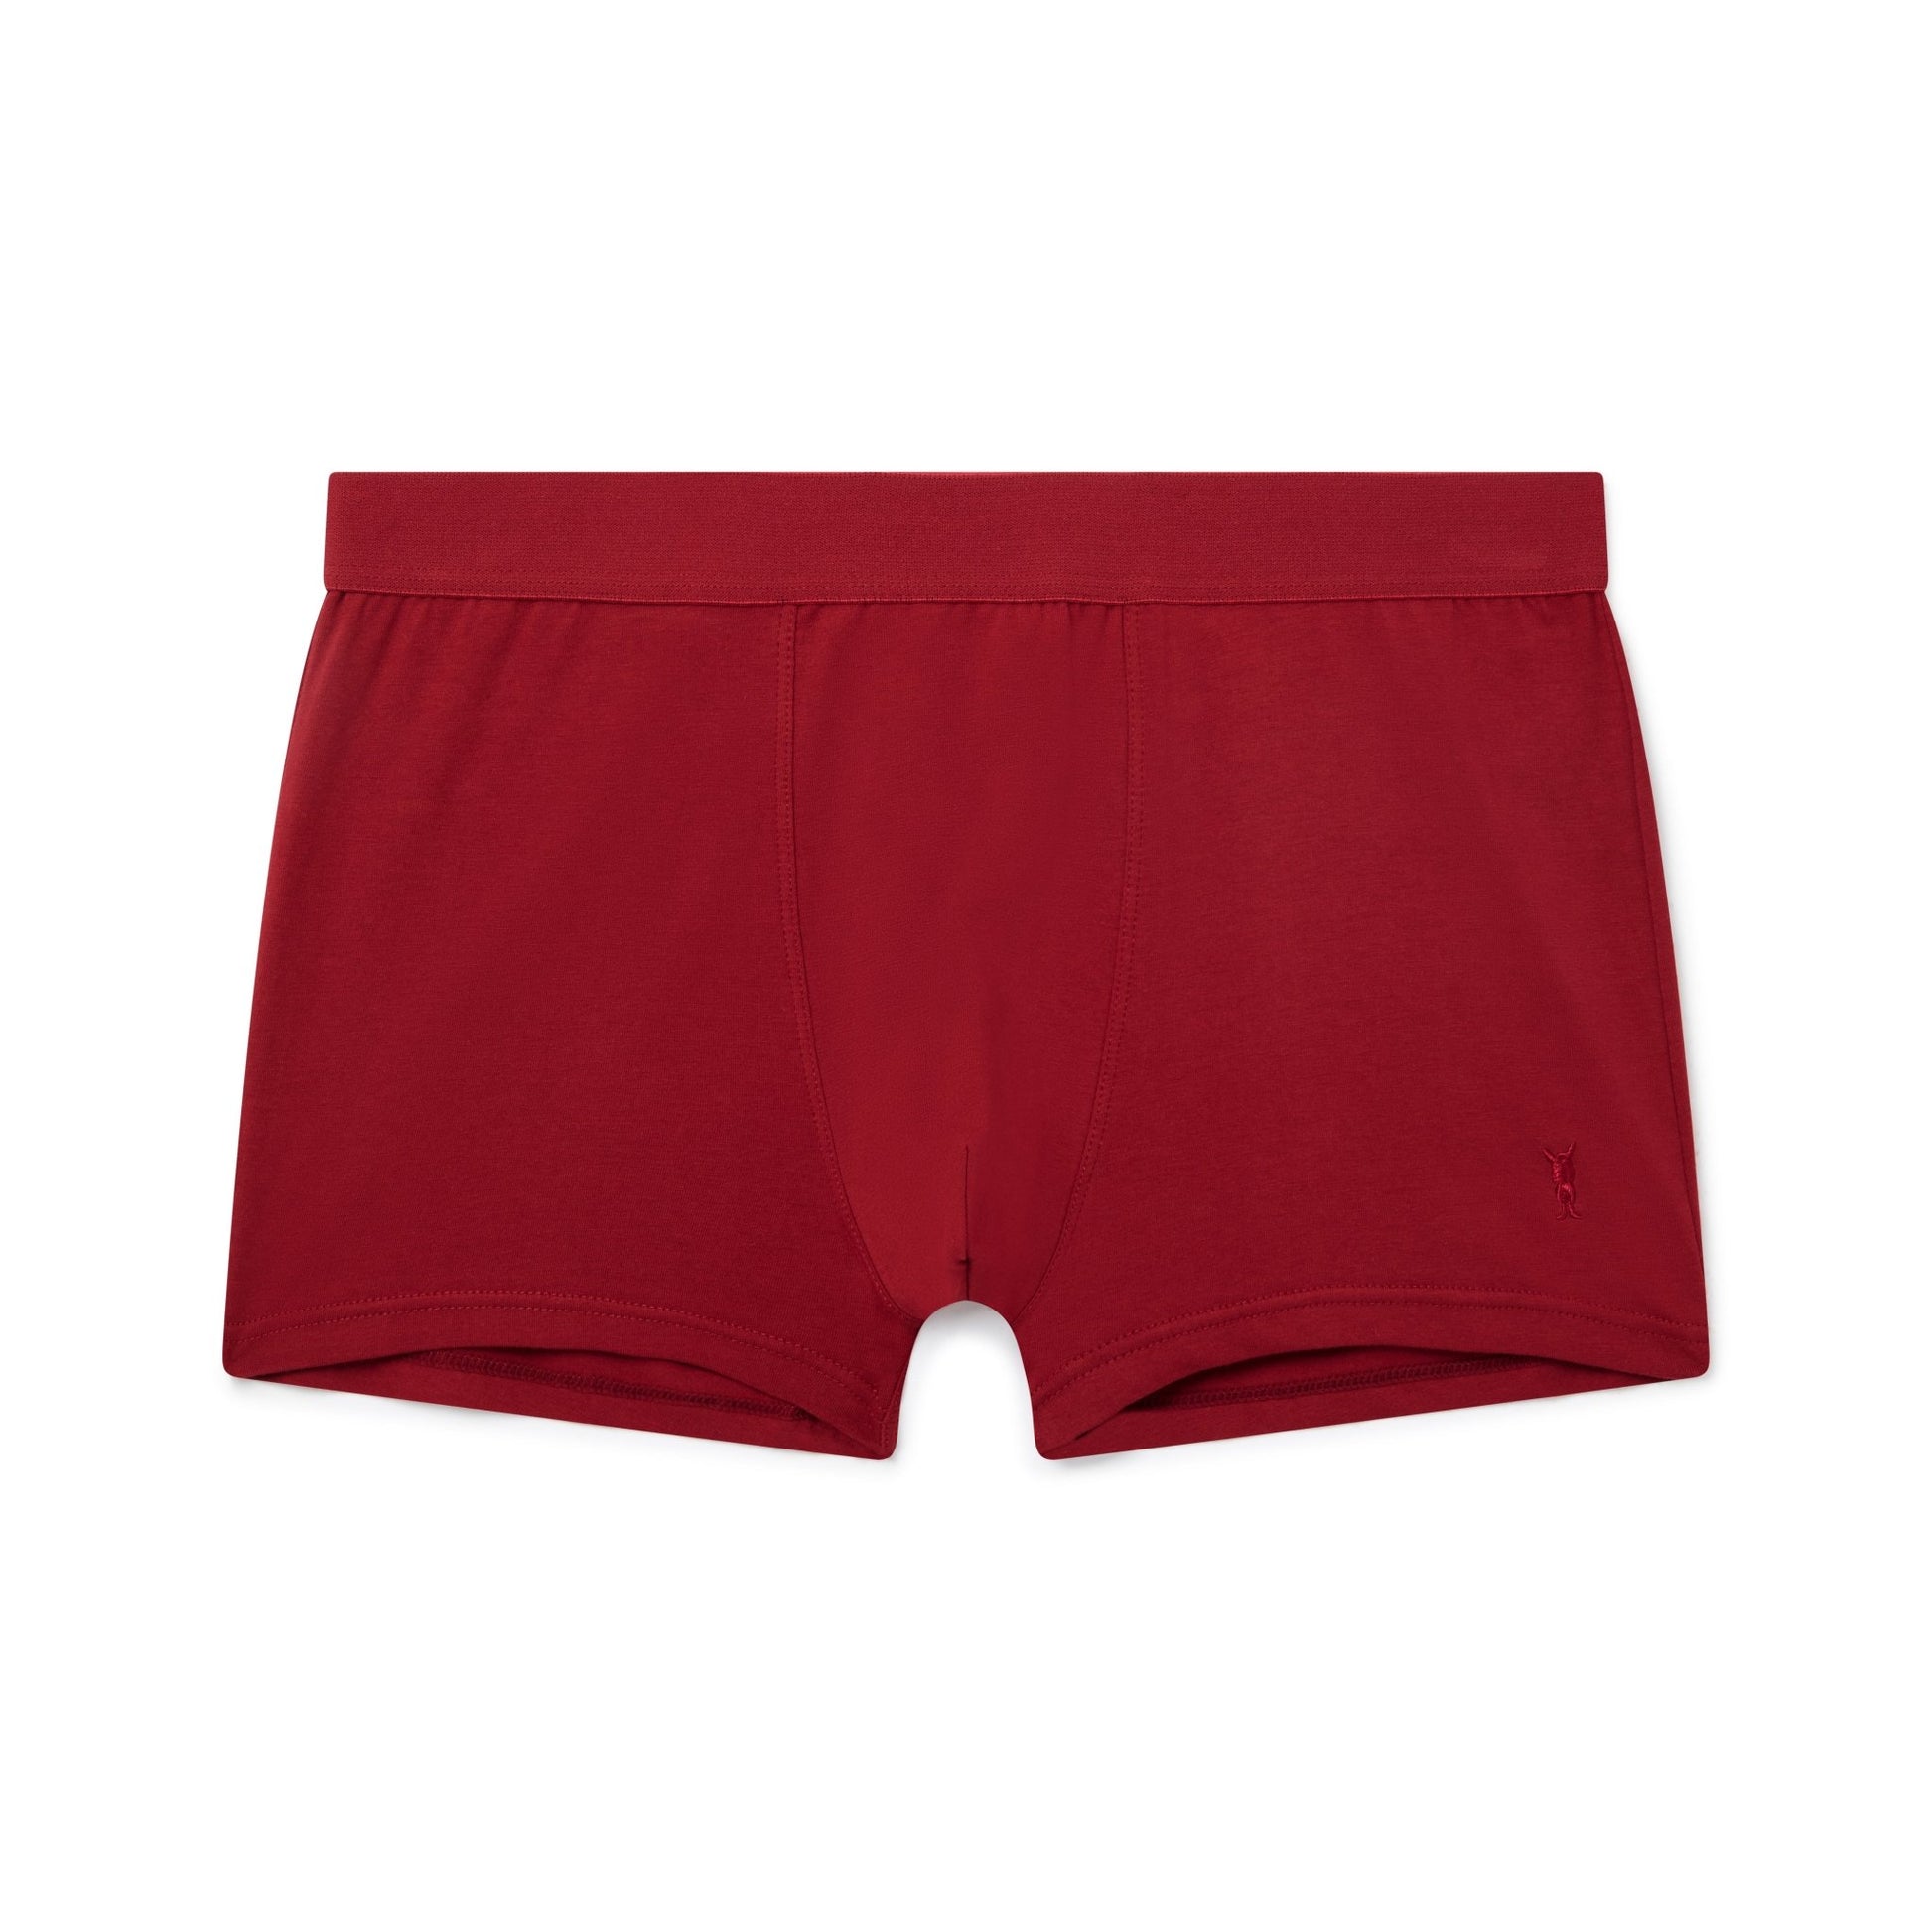 Calvin Klein Men's Boxer Shorts  Iconic Comfort and Style - Trendyol